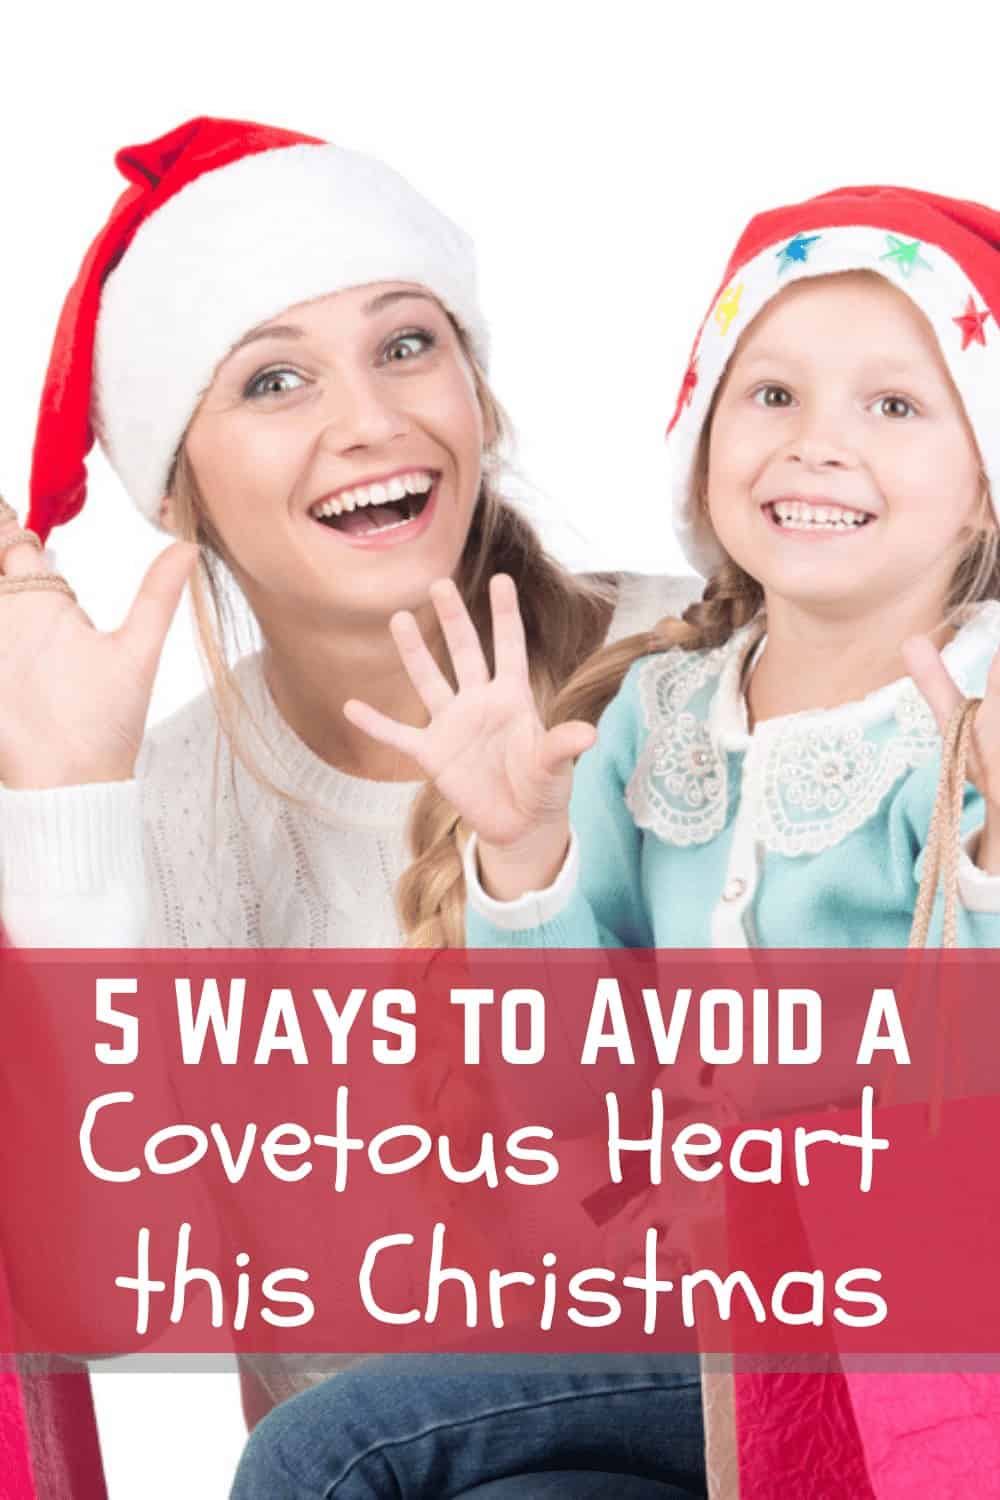 5 Ways To Avoid a Covetous Heart This Christmas